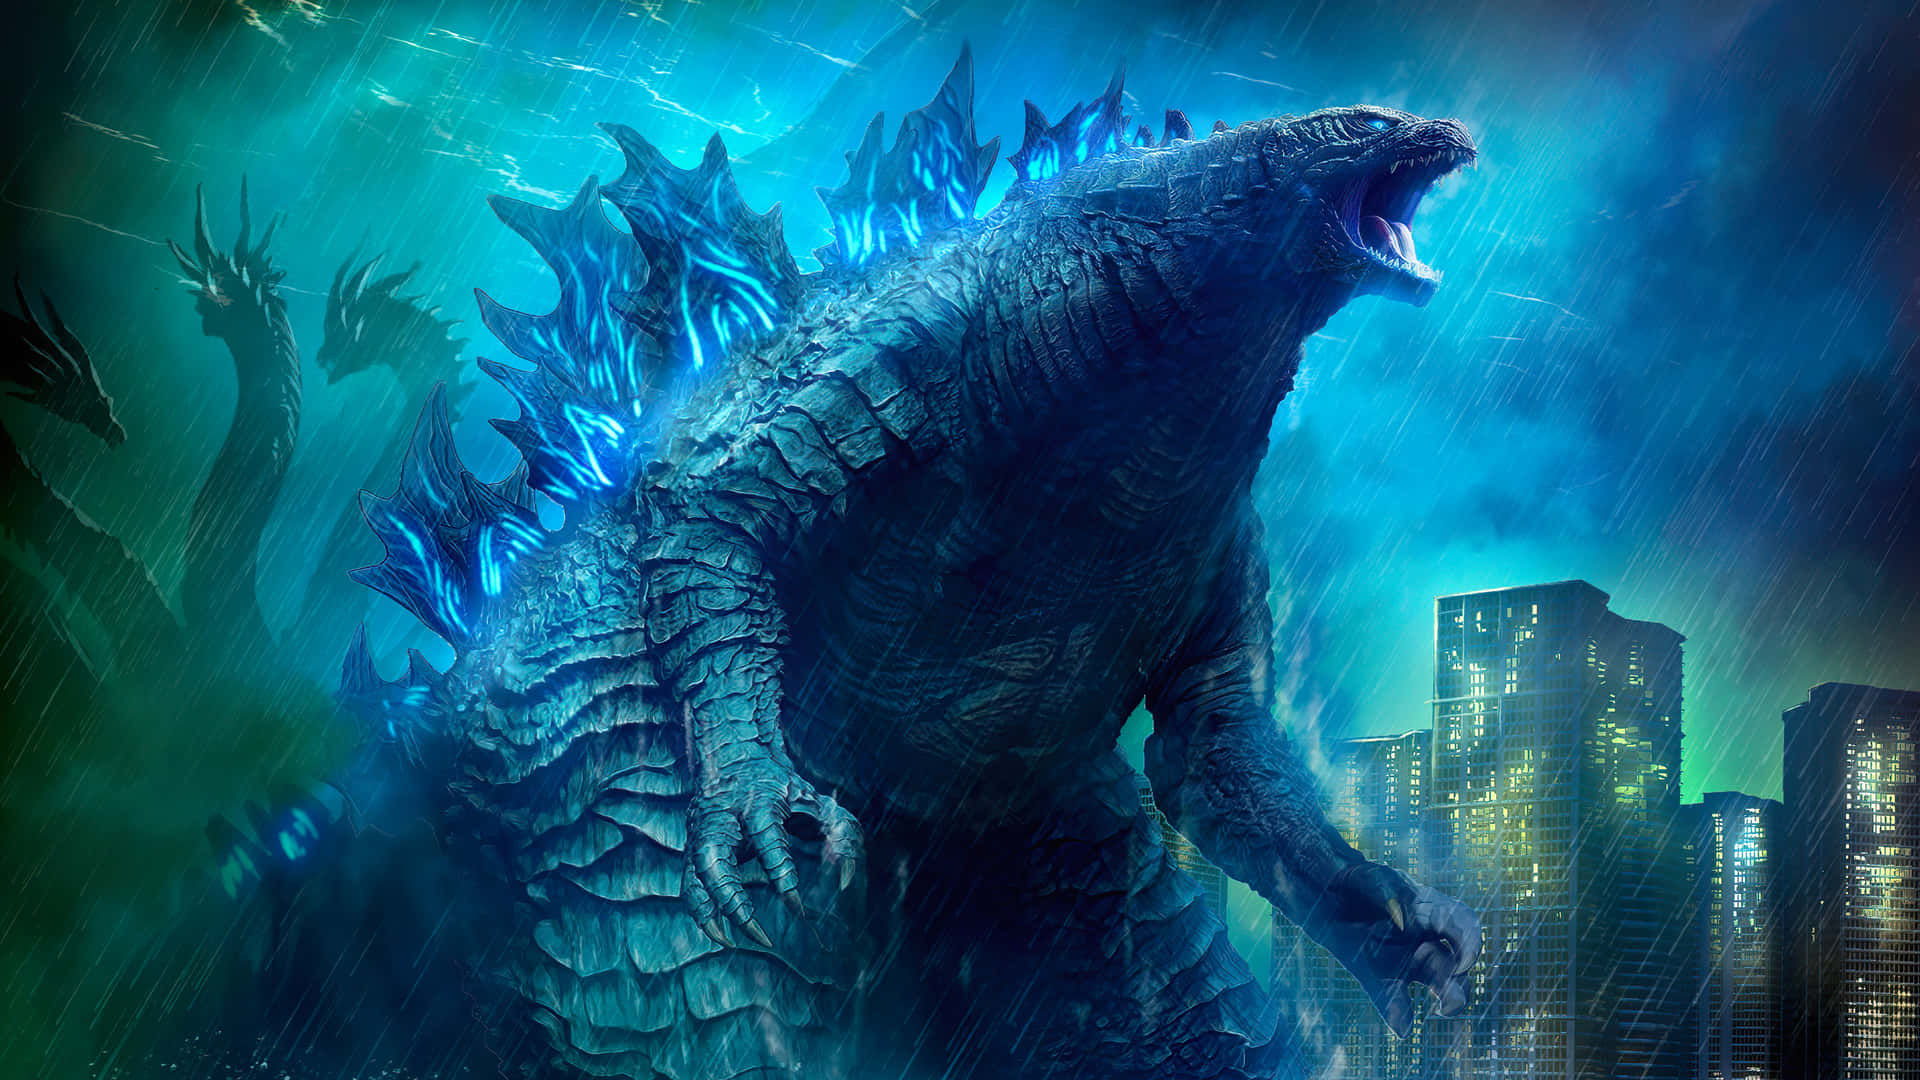 Godzilla And King Ghidorah In City Blue Aesthetic Picture